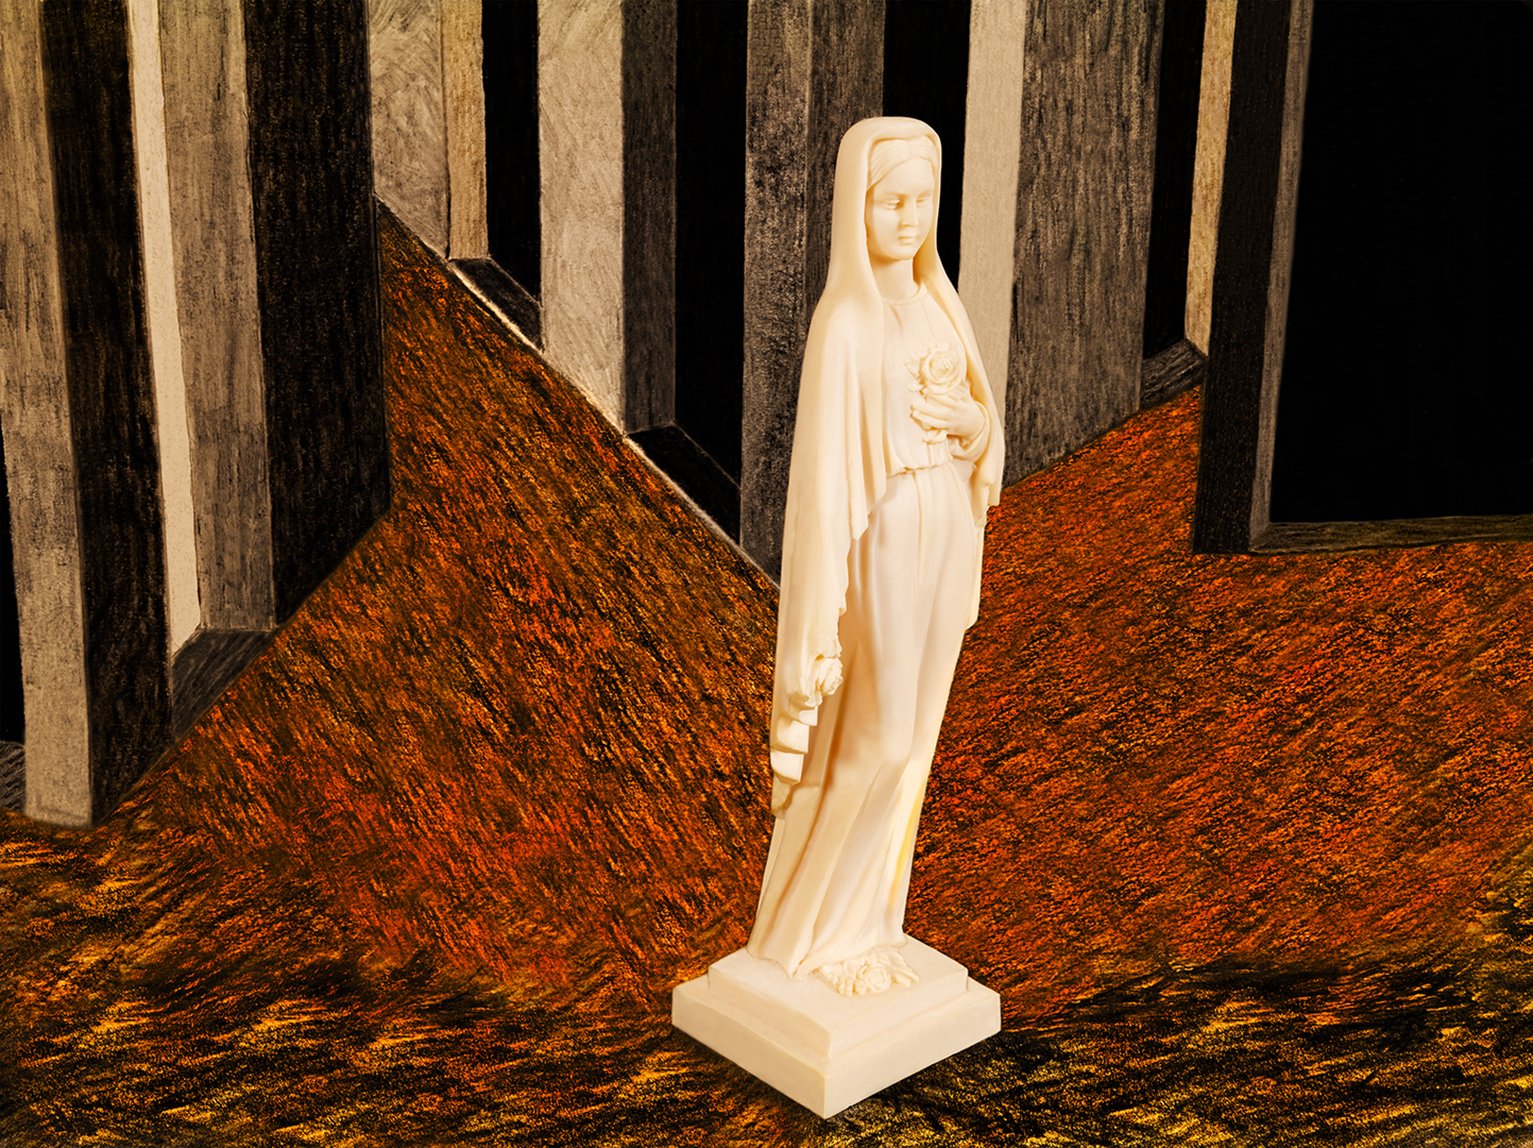    Chance Encounters    Mary in a de Chirico Dream 3 ,  2023 (The environment was  borrowed from a 1913  painting titled  Le voyage  émouvant  by Giorgio de Chirico) 64cm x 85.5cm Archival pigment print on 310gsm cotton rag  